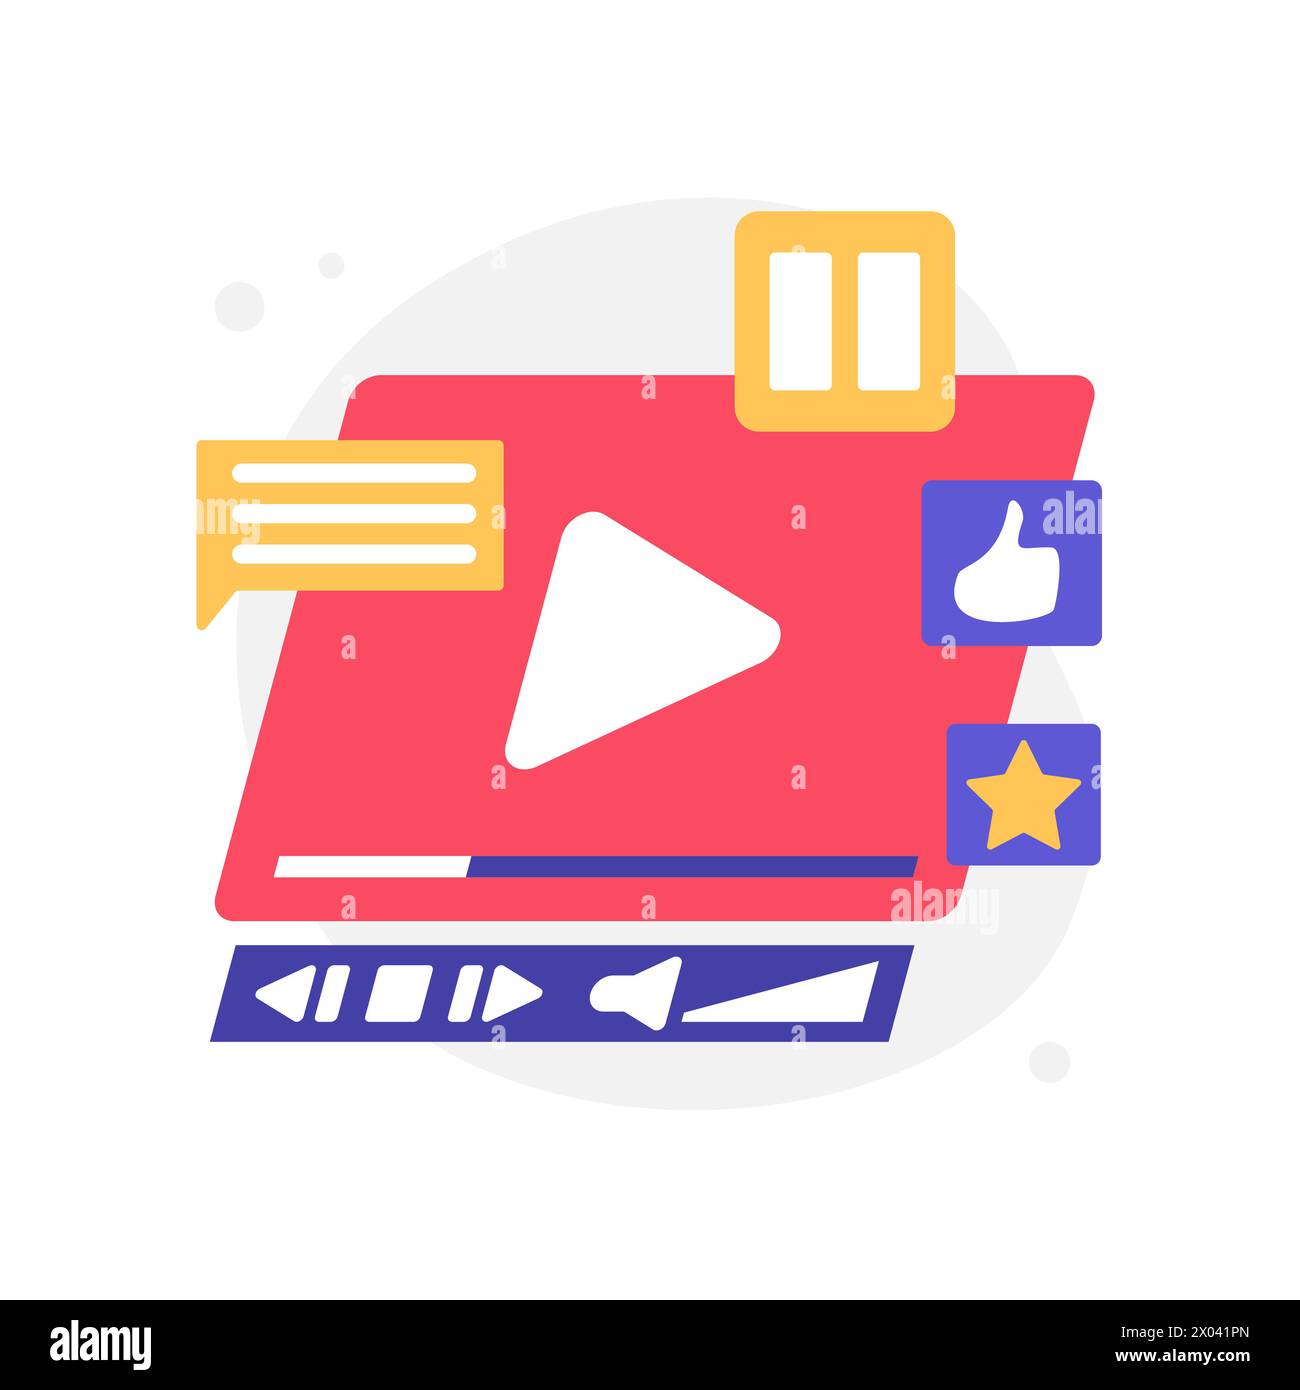 Viral video content promotion, feedback with stars, comments and thumbs up from customers vector illustration Stock Vector